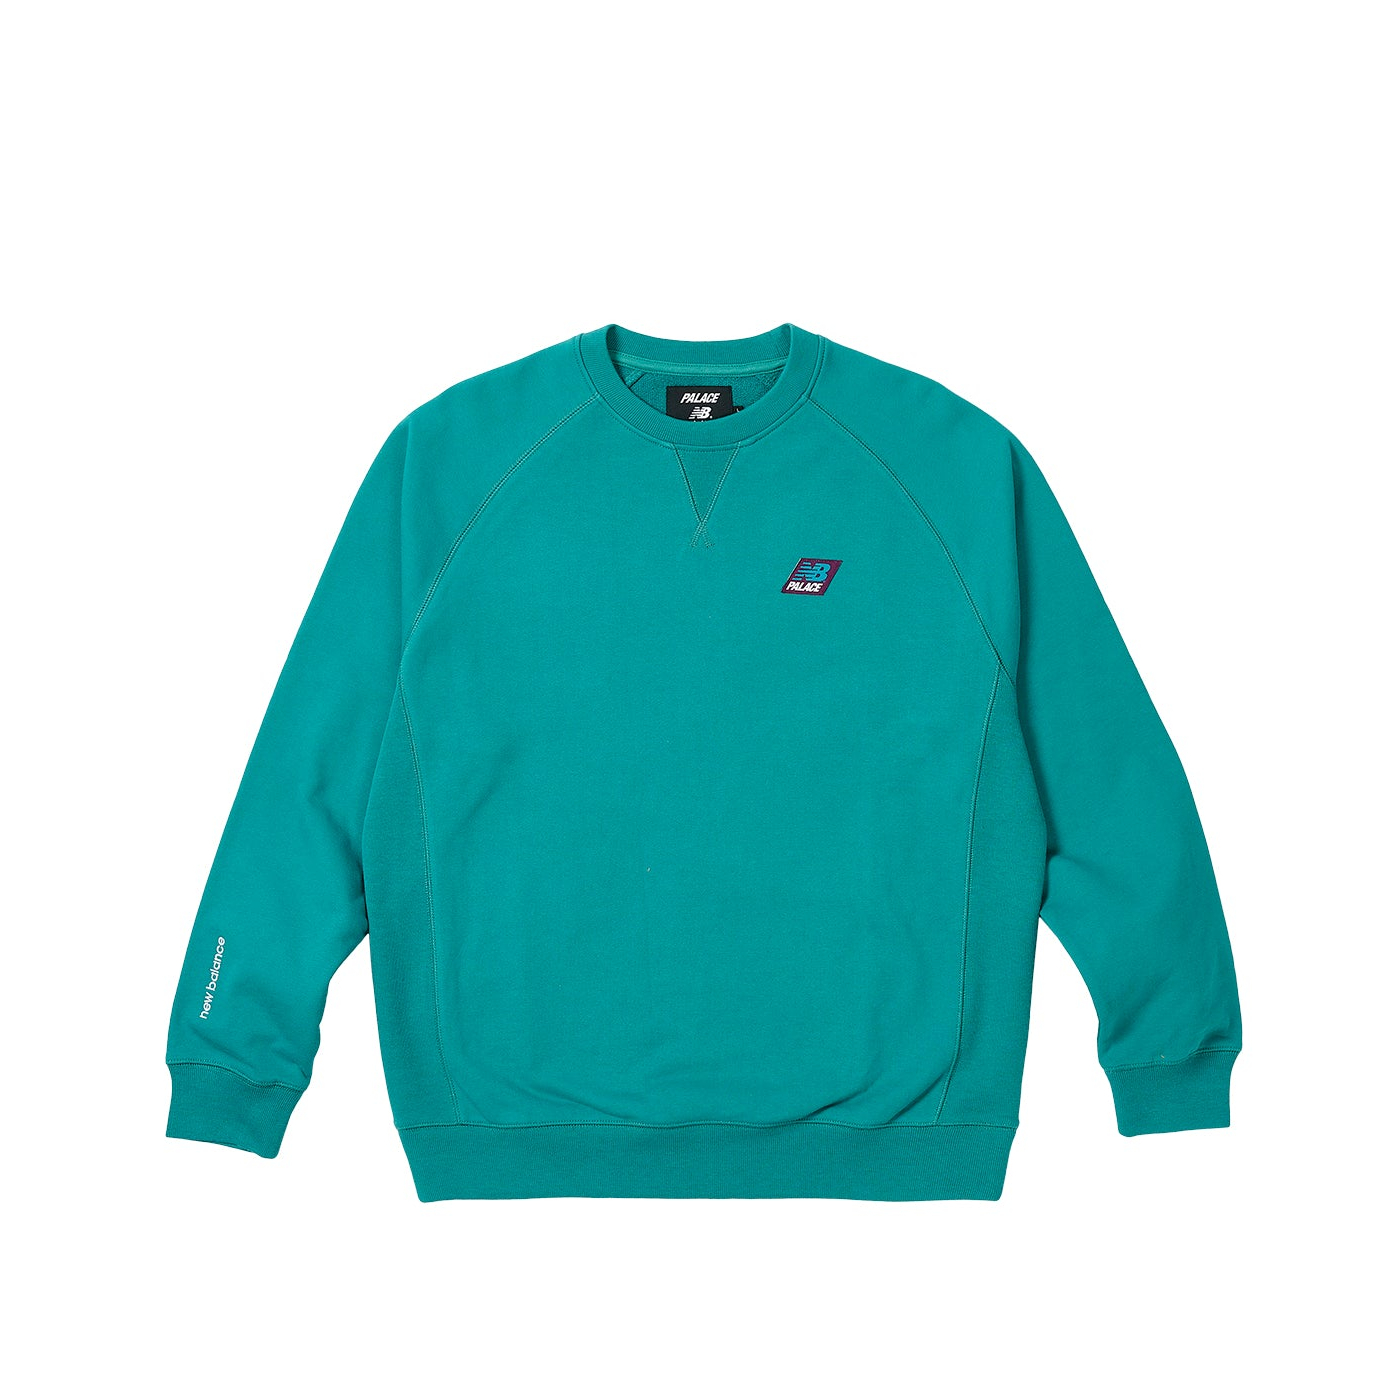 Thumbnail PALACE NEW BALANCE CREW TEAL one color